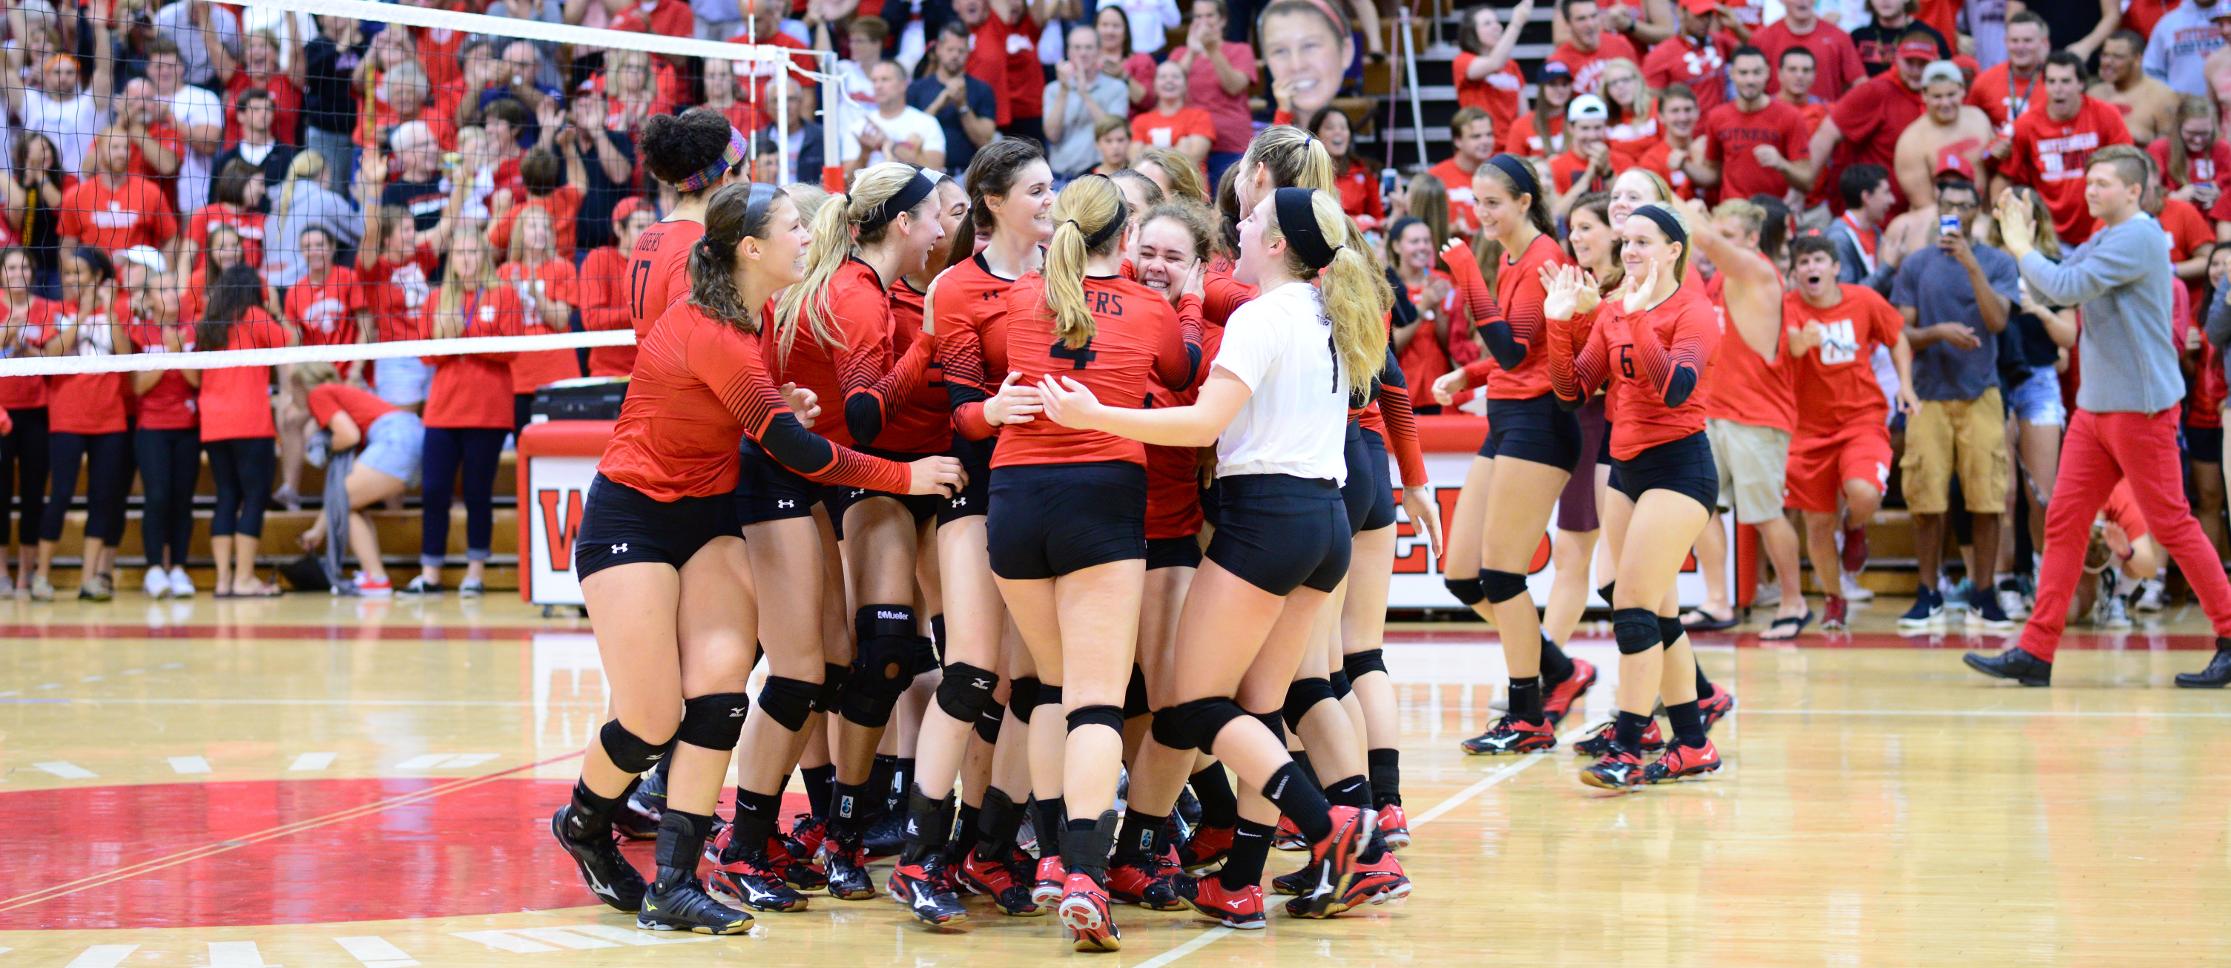 Women's Volleyball Starts Off 1-0 in NCAC Play with 3-1 Victory Over Hiram